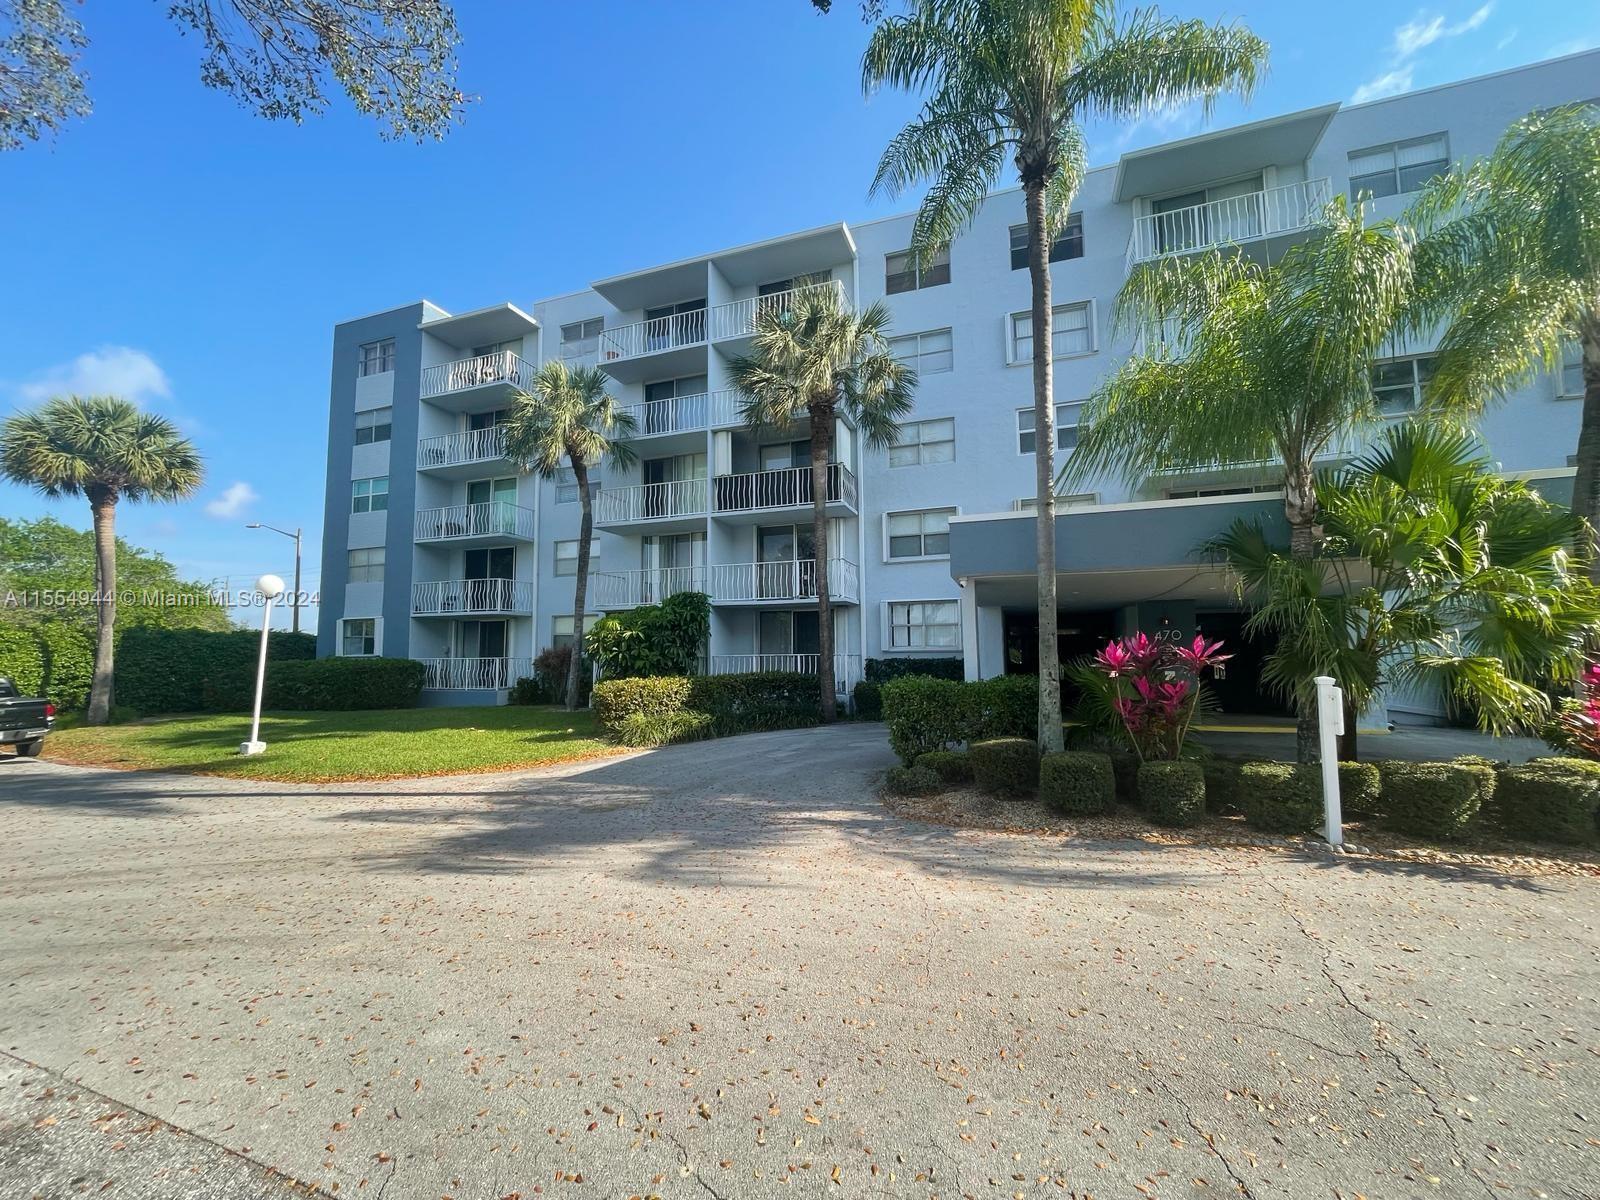 Photo of 470 Executive Center Dr #3H in West Palm Beach, FL